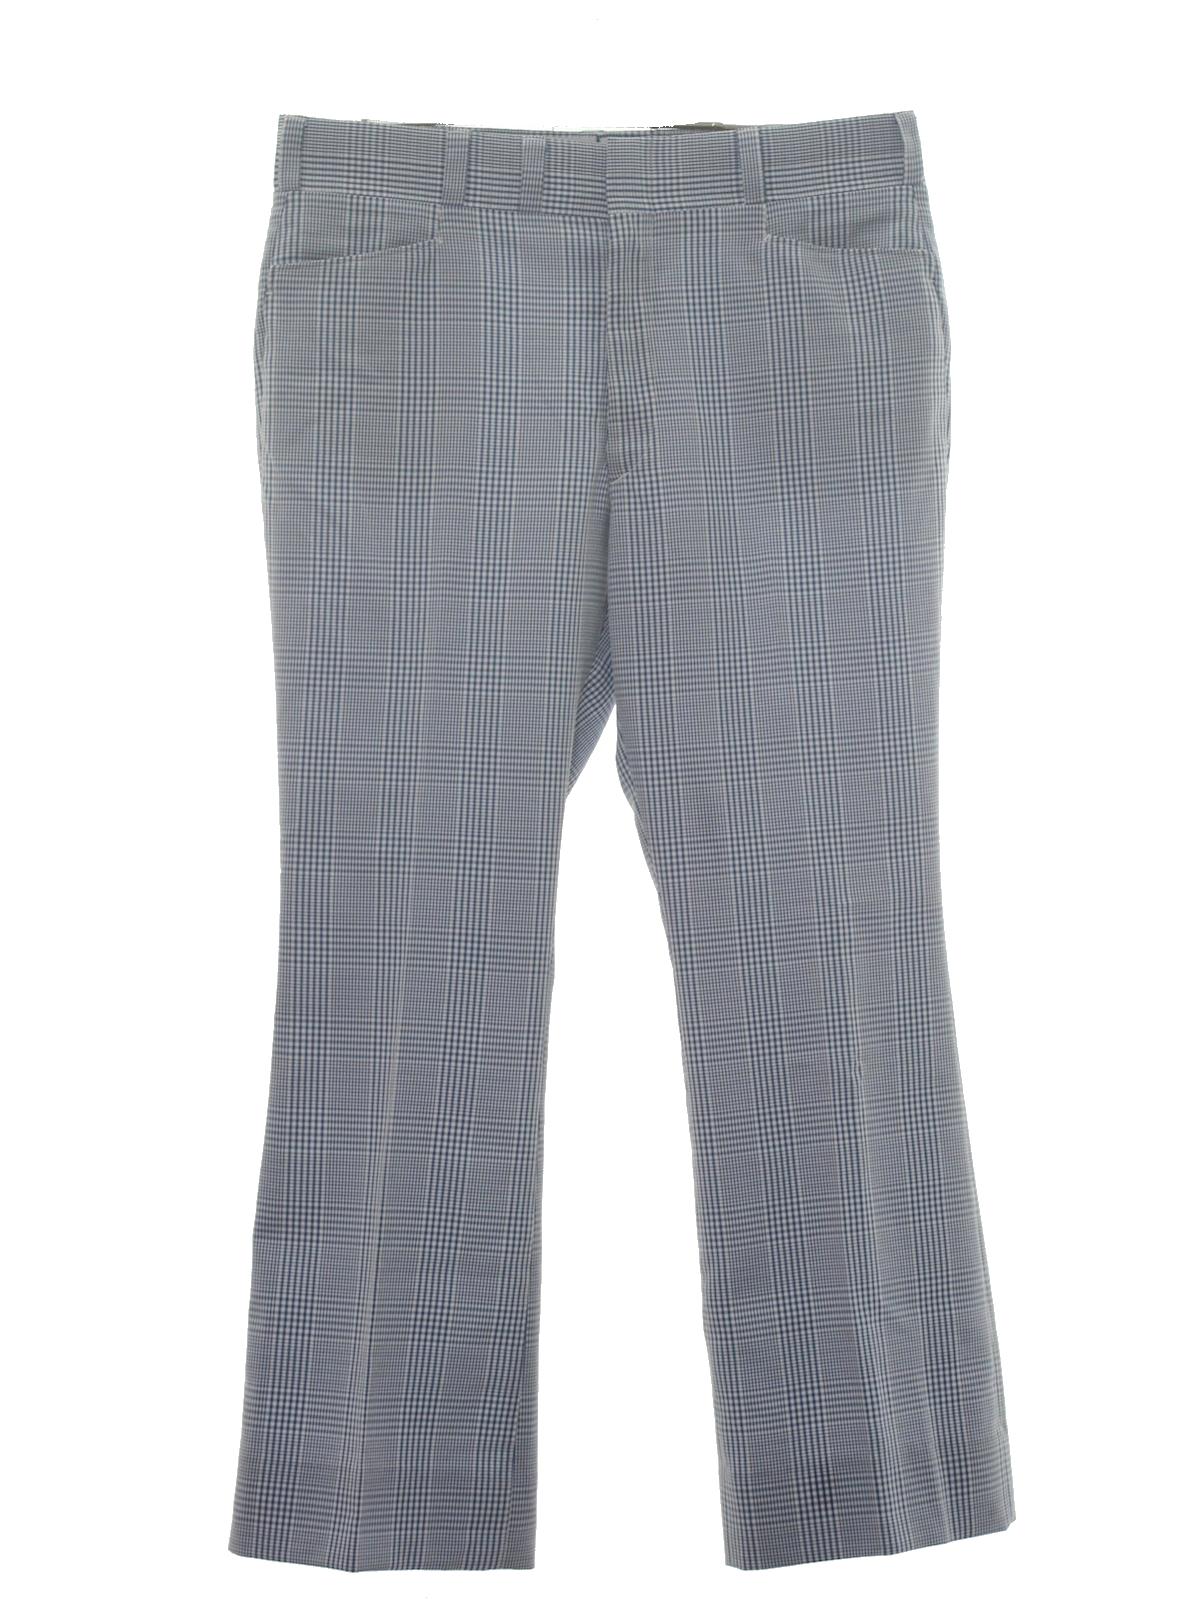 70's Tailors Bench Flared Pants / Flares: 70s -Tailors Bench- Mens ...